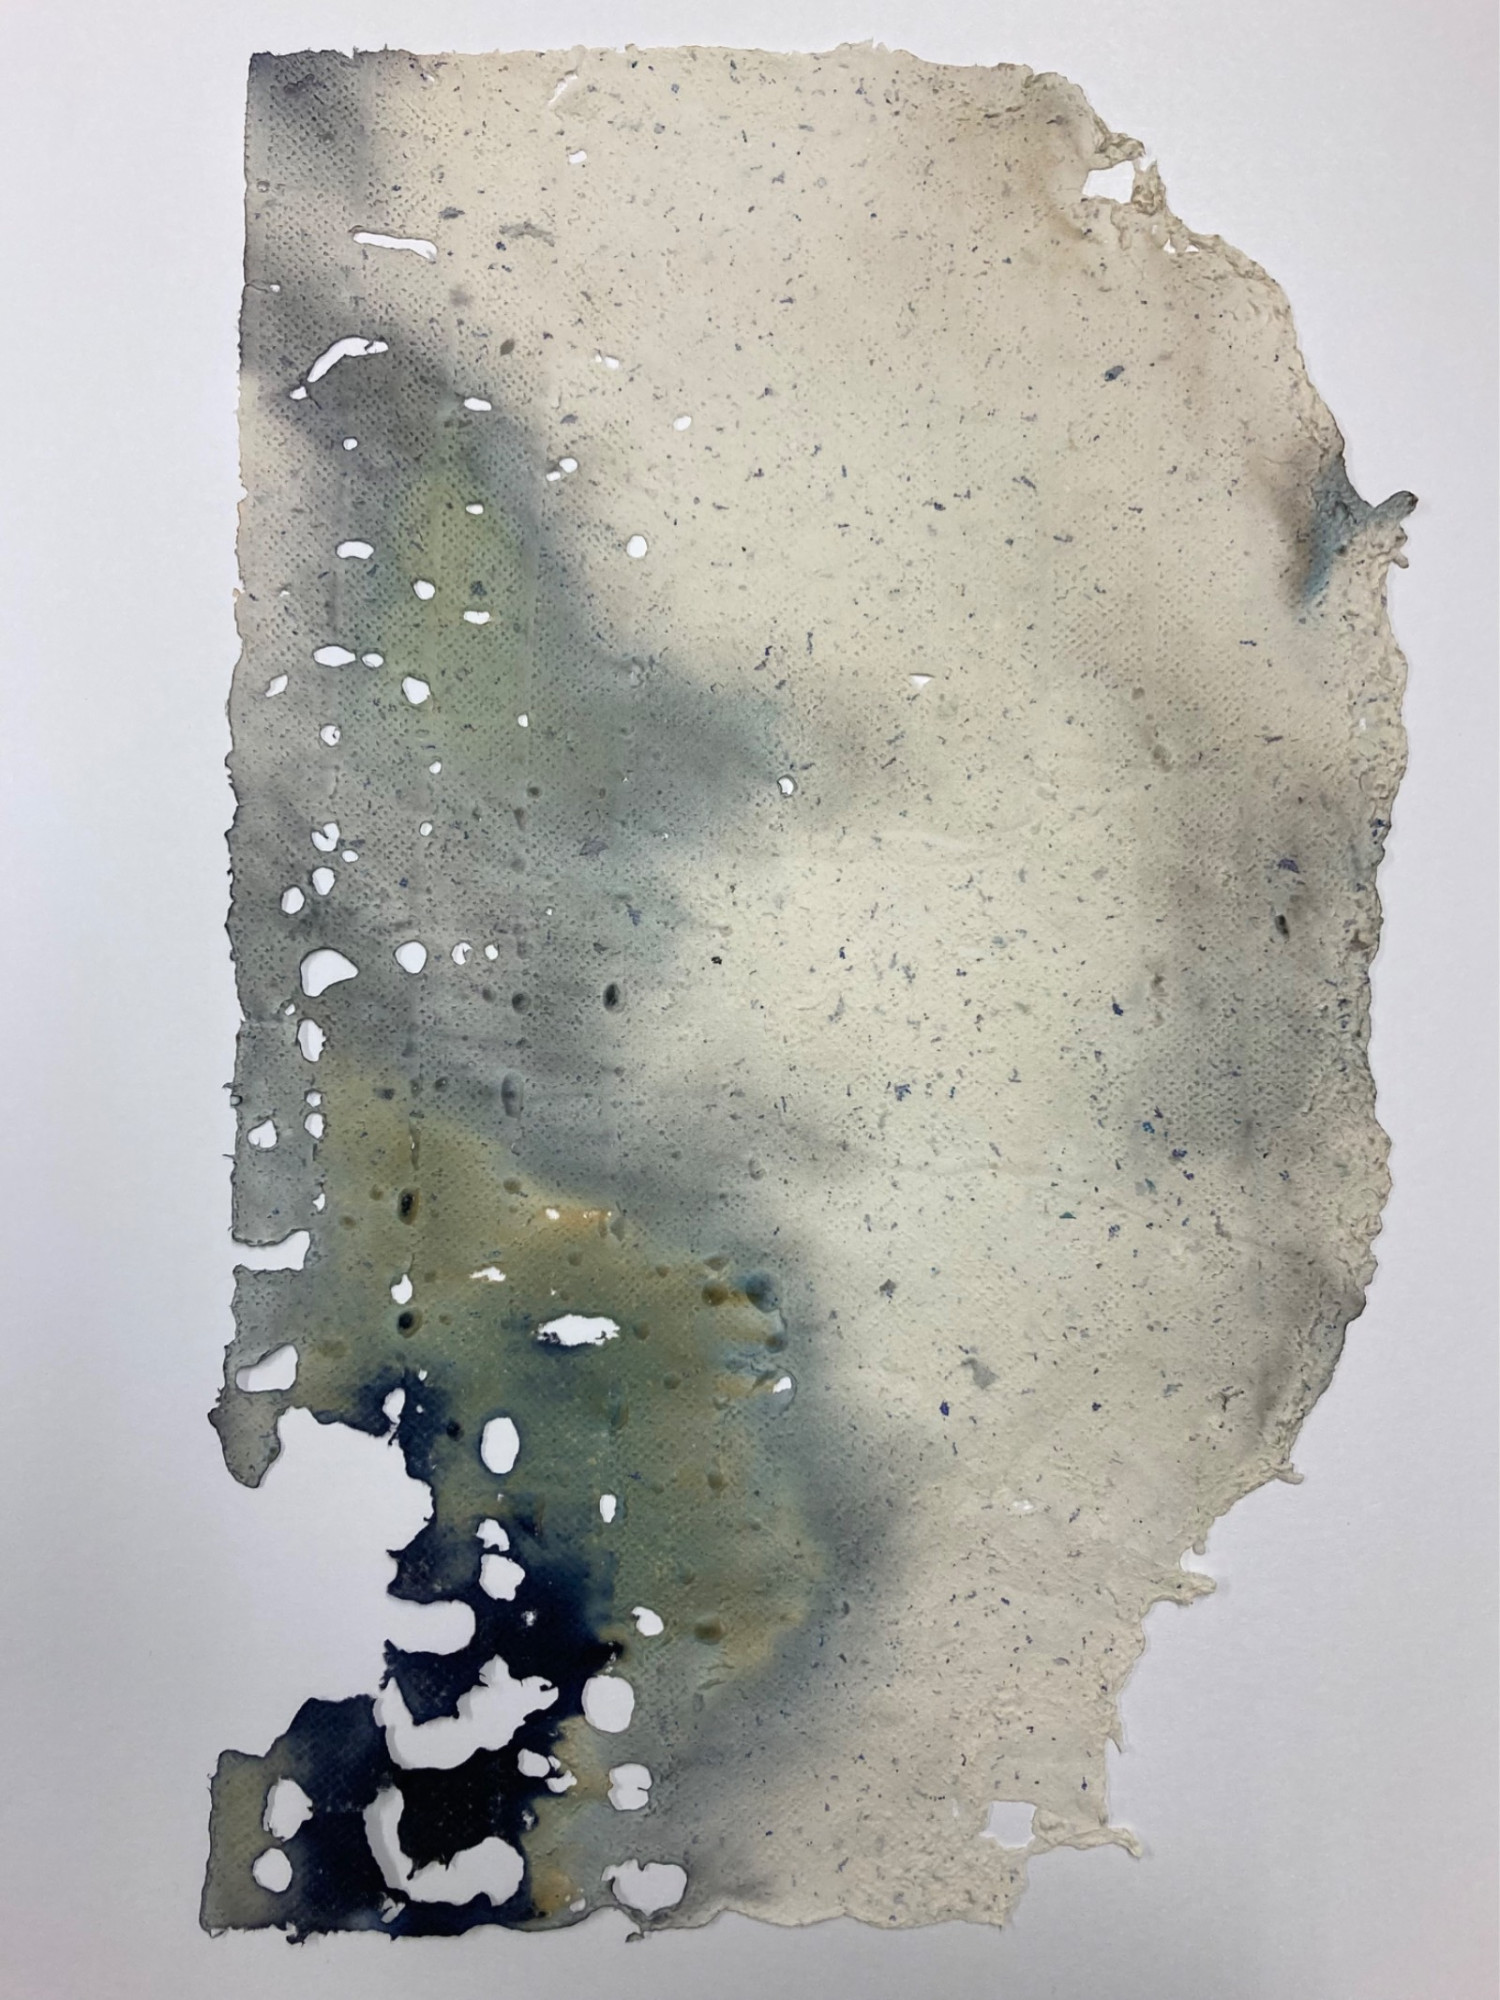 *C  on f orm*, handmade paper using cyanotype and collected fragments of nature, 41 x 58cm